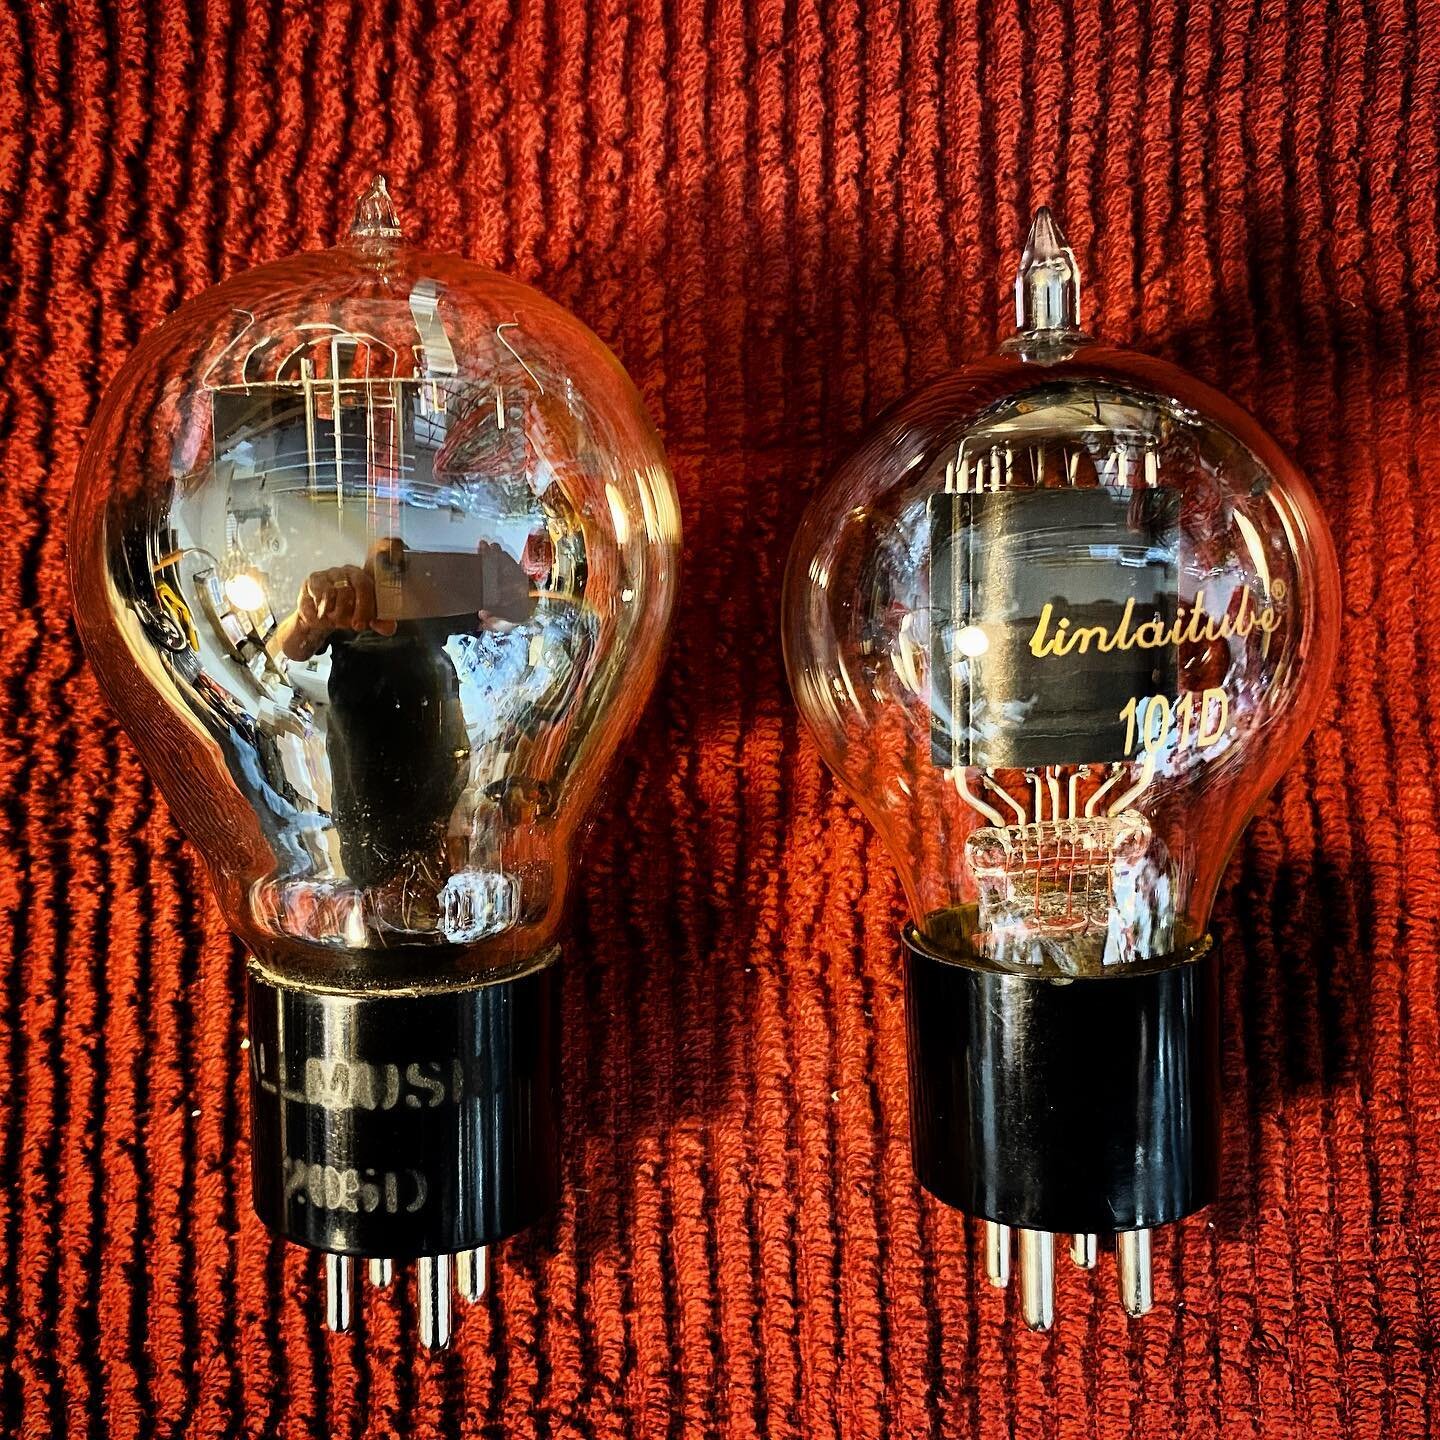 205D on the left, tube of choice for the &ldquo;S.E.&rdquo; version of the Iron-Coupled DHT Line-Preamplifier. 101D on the right, tube of choice for the upcoming &ldquo;Tanoshi&rdquo;, choke-loaded, DHT Line-Preamplifier. #tube #tubeamp #tubeamplifie